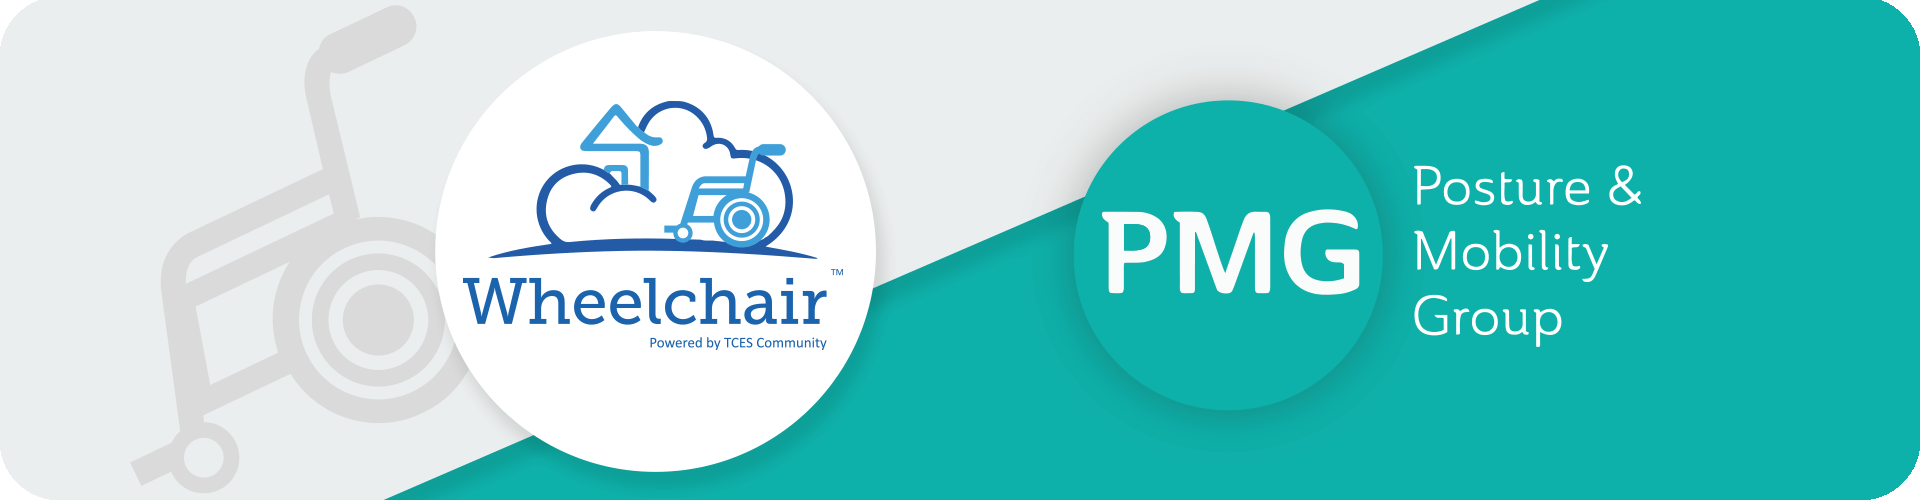 TCES wheelchair and PMG logos